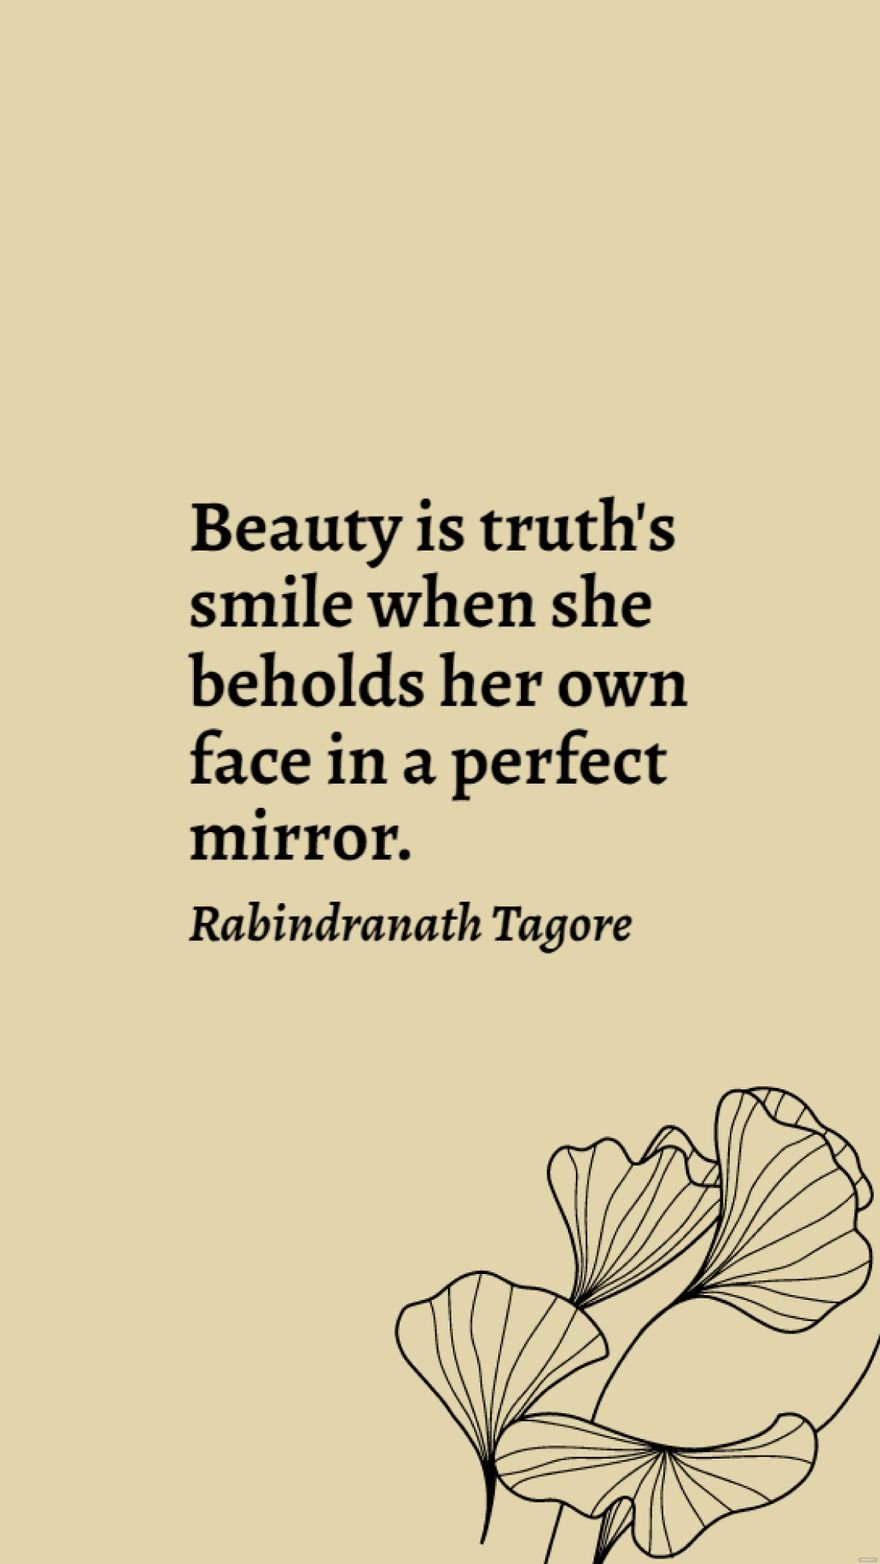 Rabindranath Tagore - Beauty is truth's smile when she beholds her own face in a perfect mirror.